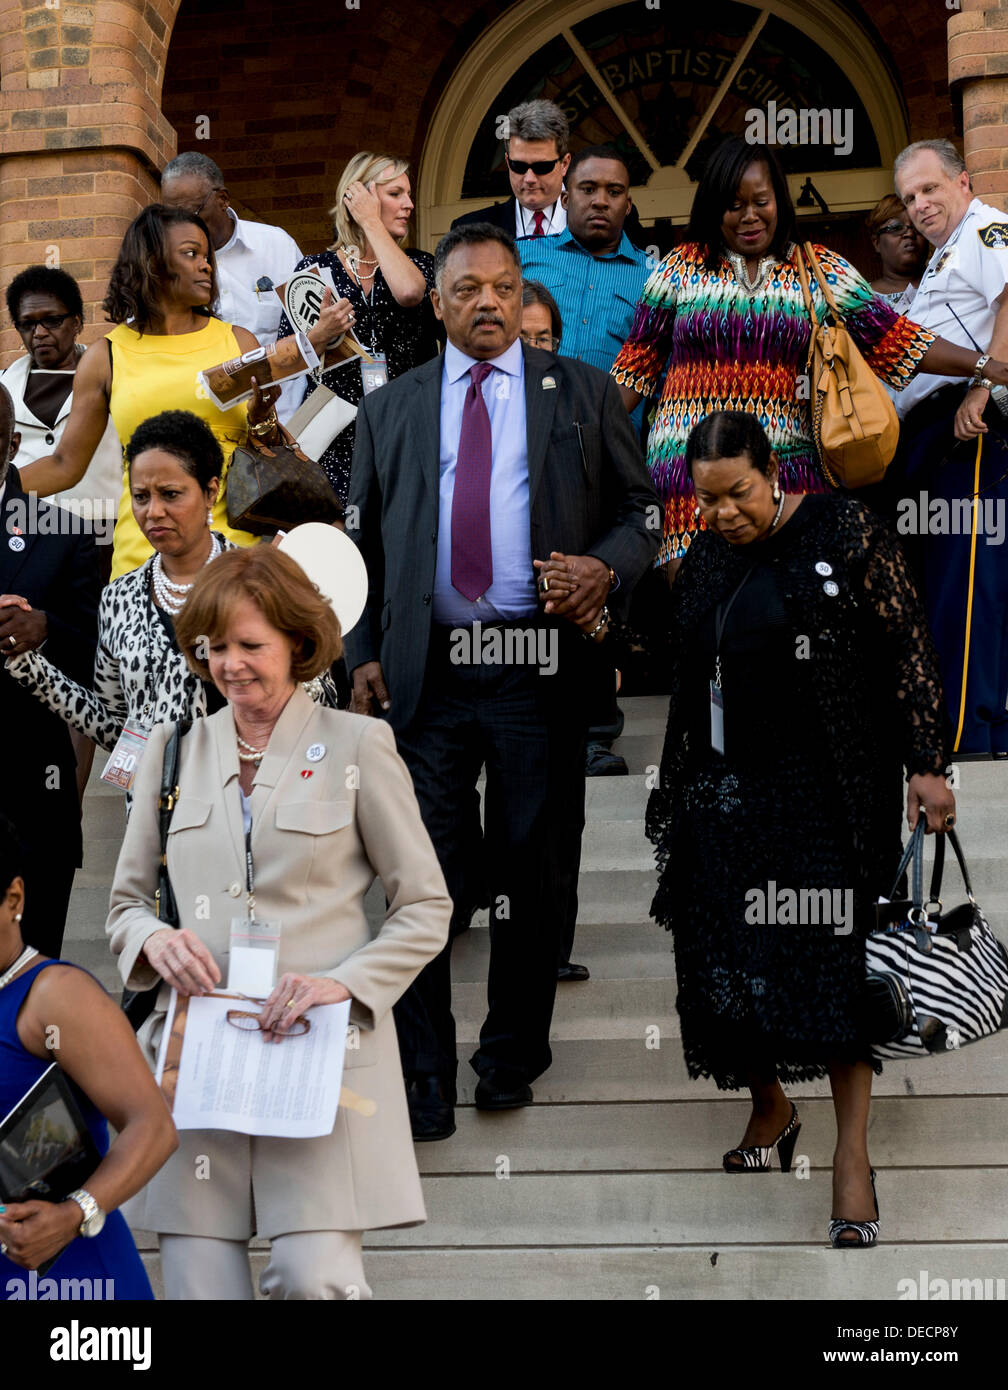 Birmingham, Alabama, USA. 15th Sep, 2013. The REV. JESSE JACKSON leaves the16th St. Baptist Church after the official commemoration of the 50th anniversary of the bombing that killed the four little girls. © Brian Cahn/ZUMAPRESS.com/Alamy Live News Stock Photo